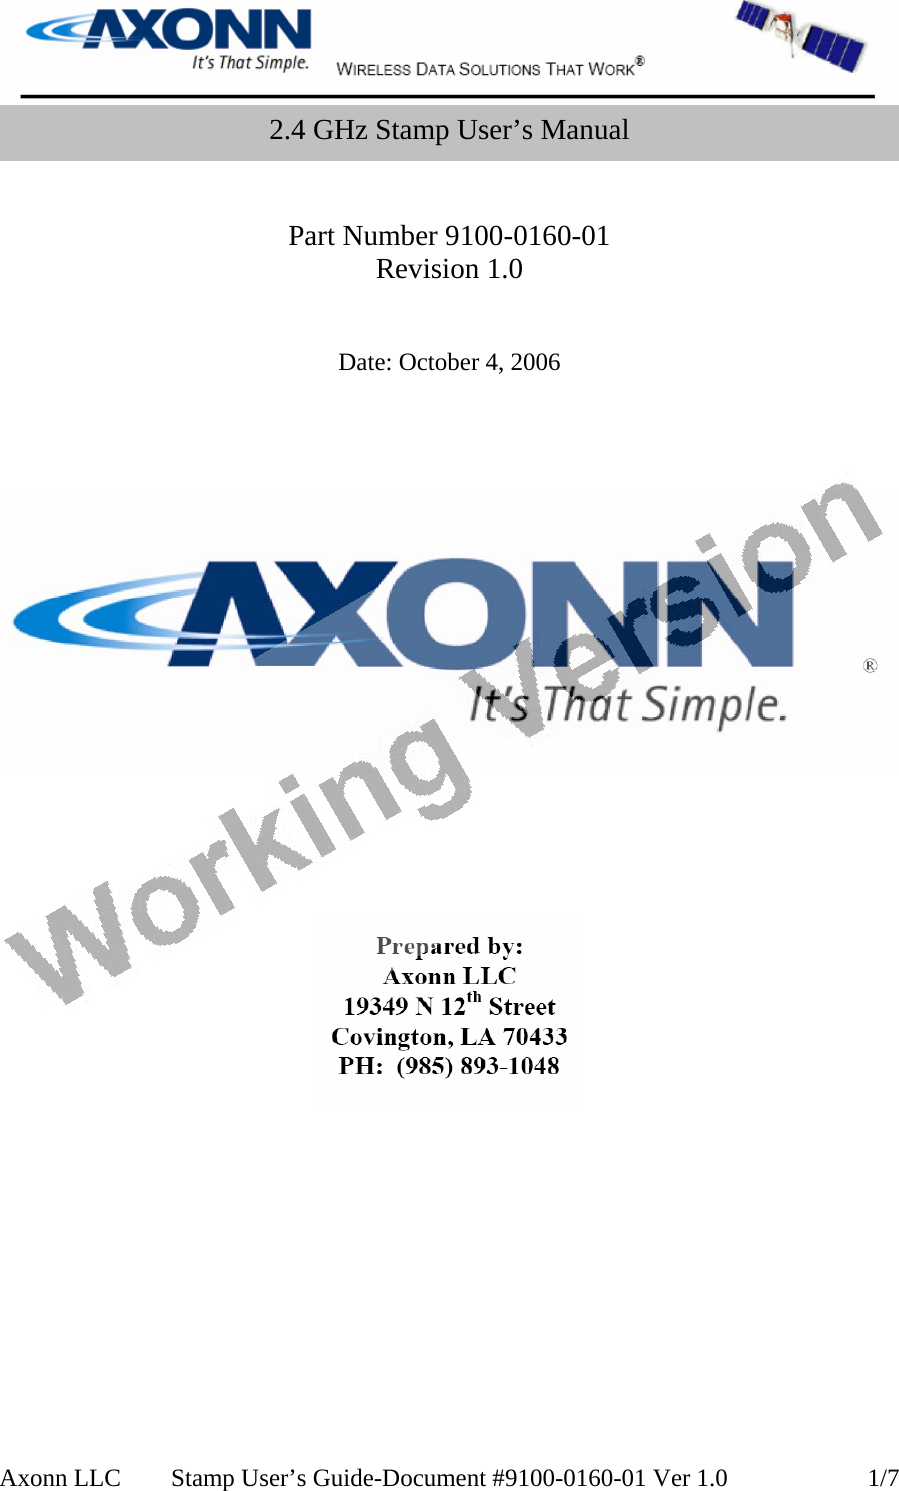  Axonn LLC  Stamp User’s Guide-Document #9100-0160-01 Ver 1.0  1/7    Part Number 9100-0160-01 Revision 1.0   Date: October 4, 2006                      2.4 GHz Stamp User’s Manual 